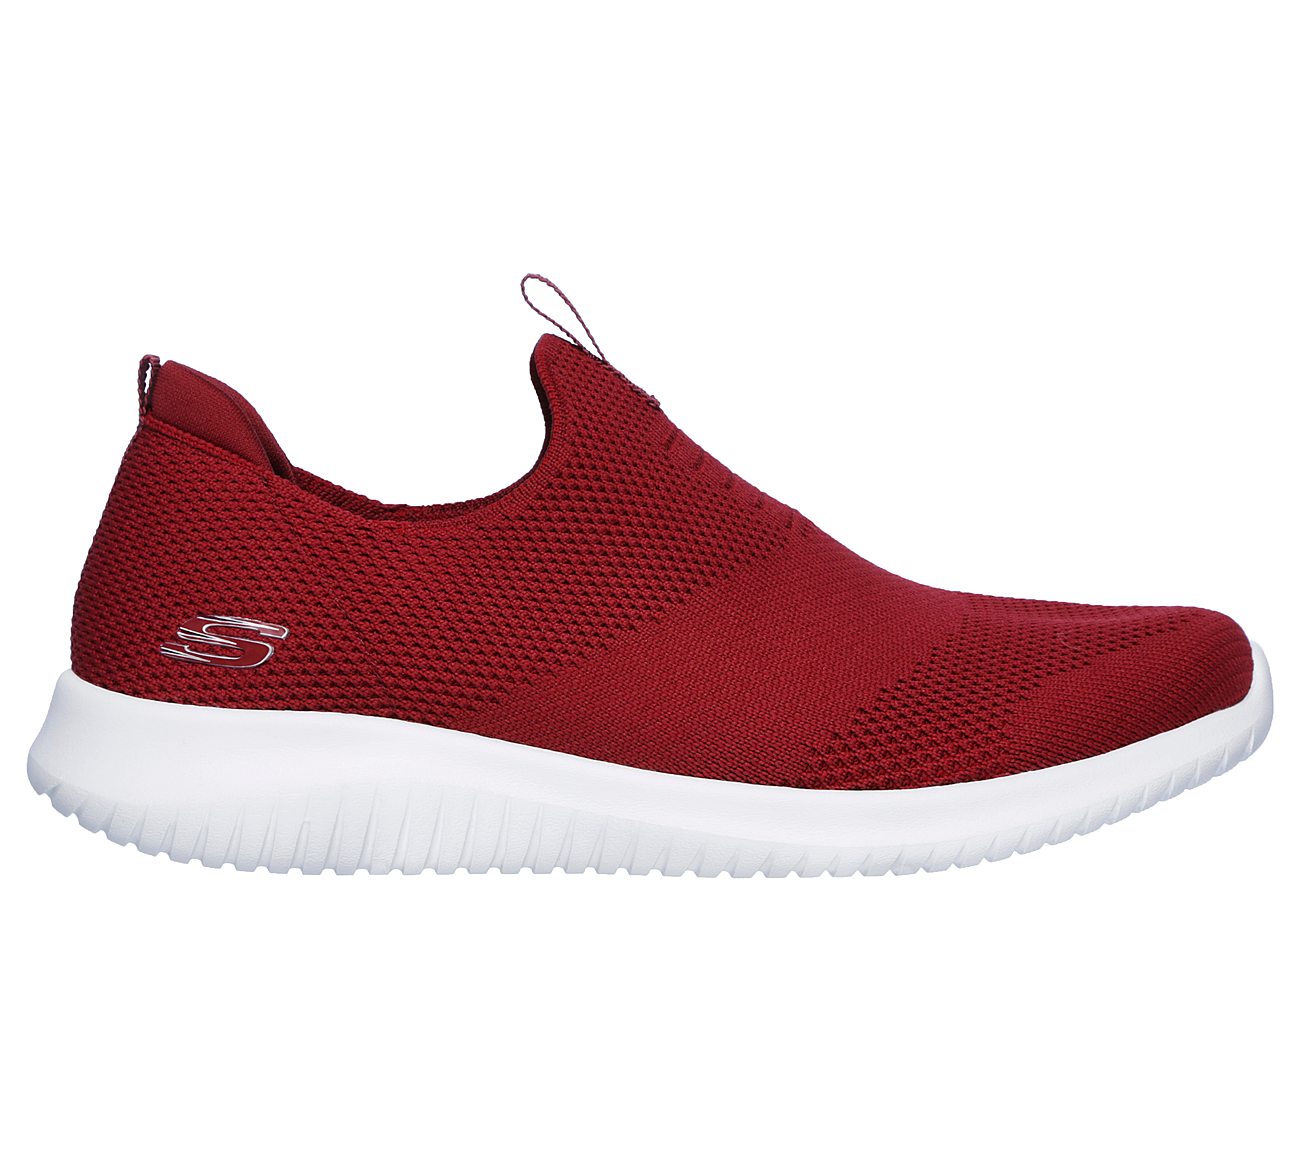 stretch knit shoes by skechers Sale,up 